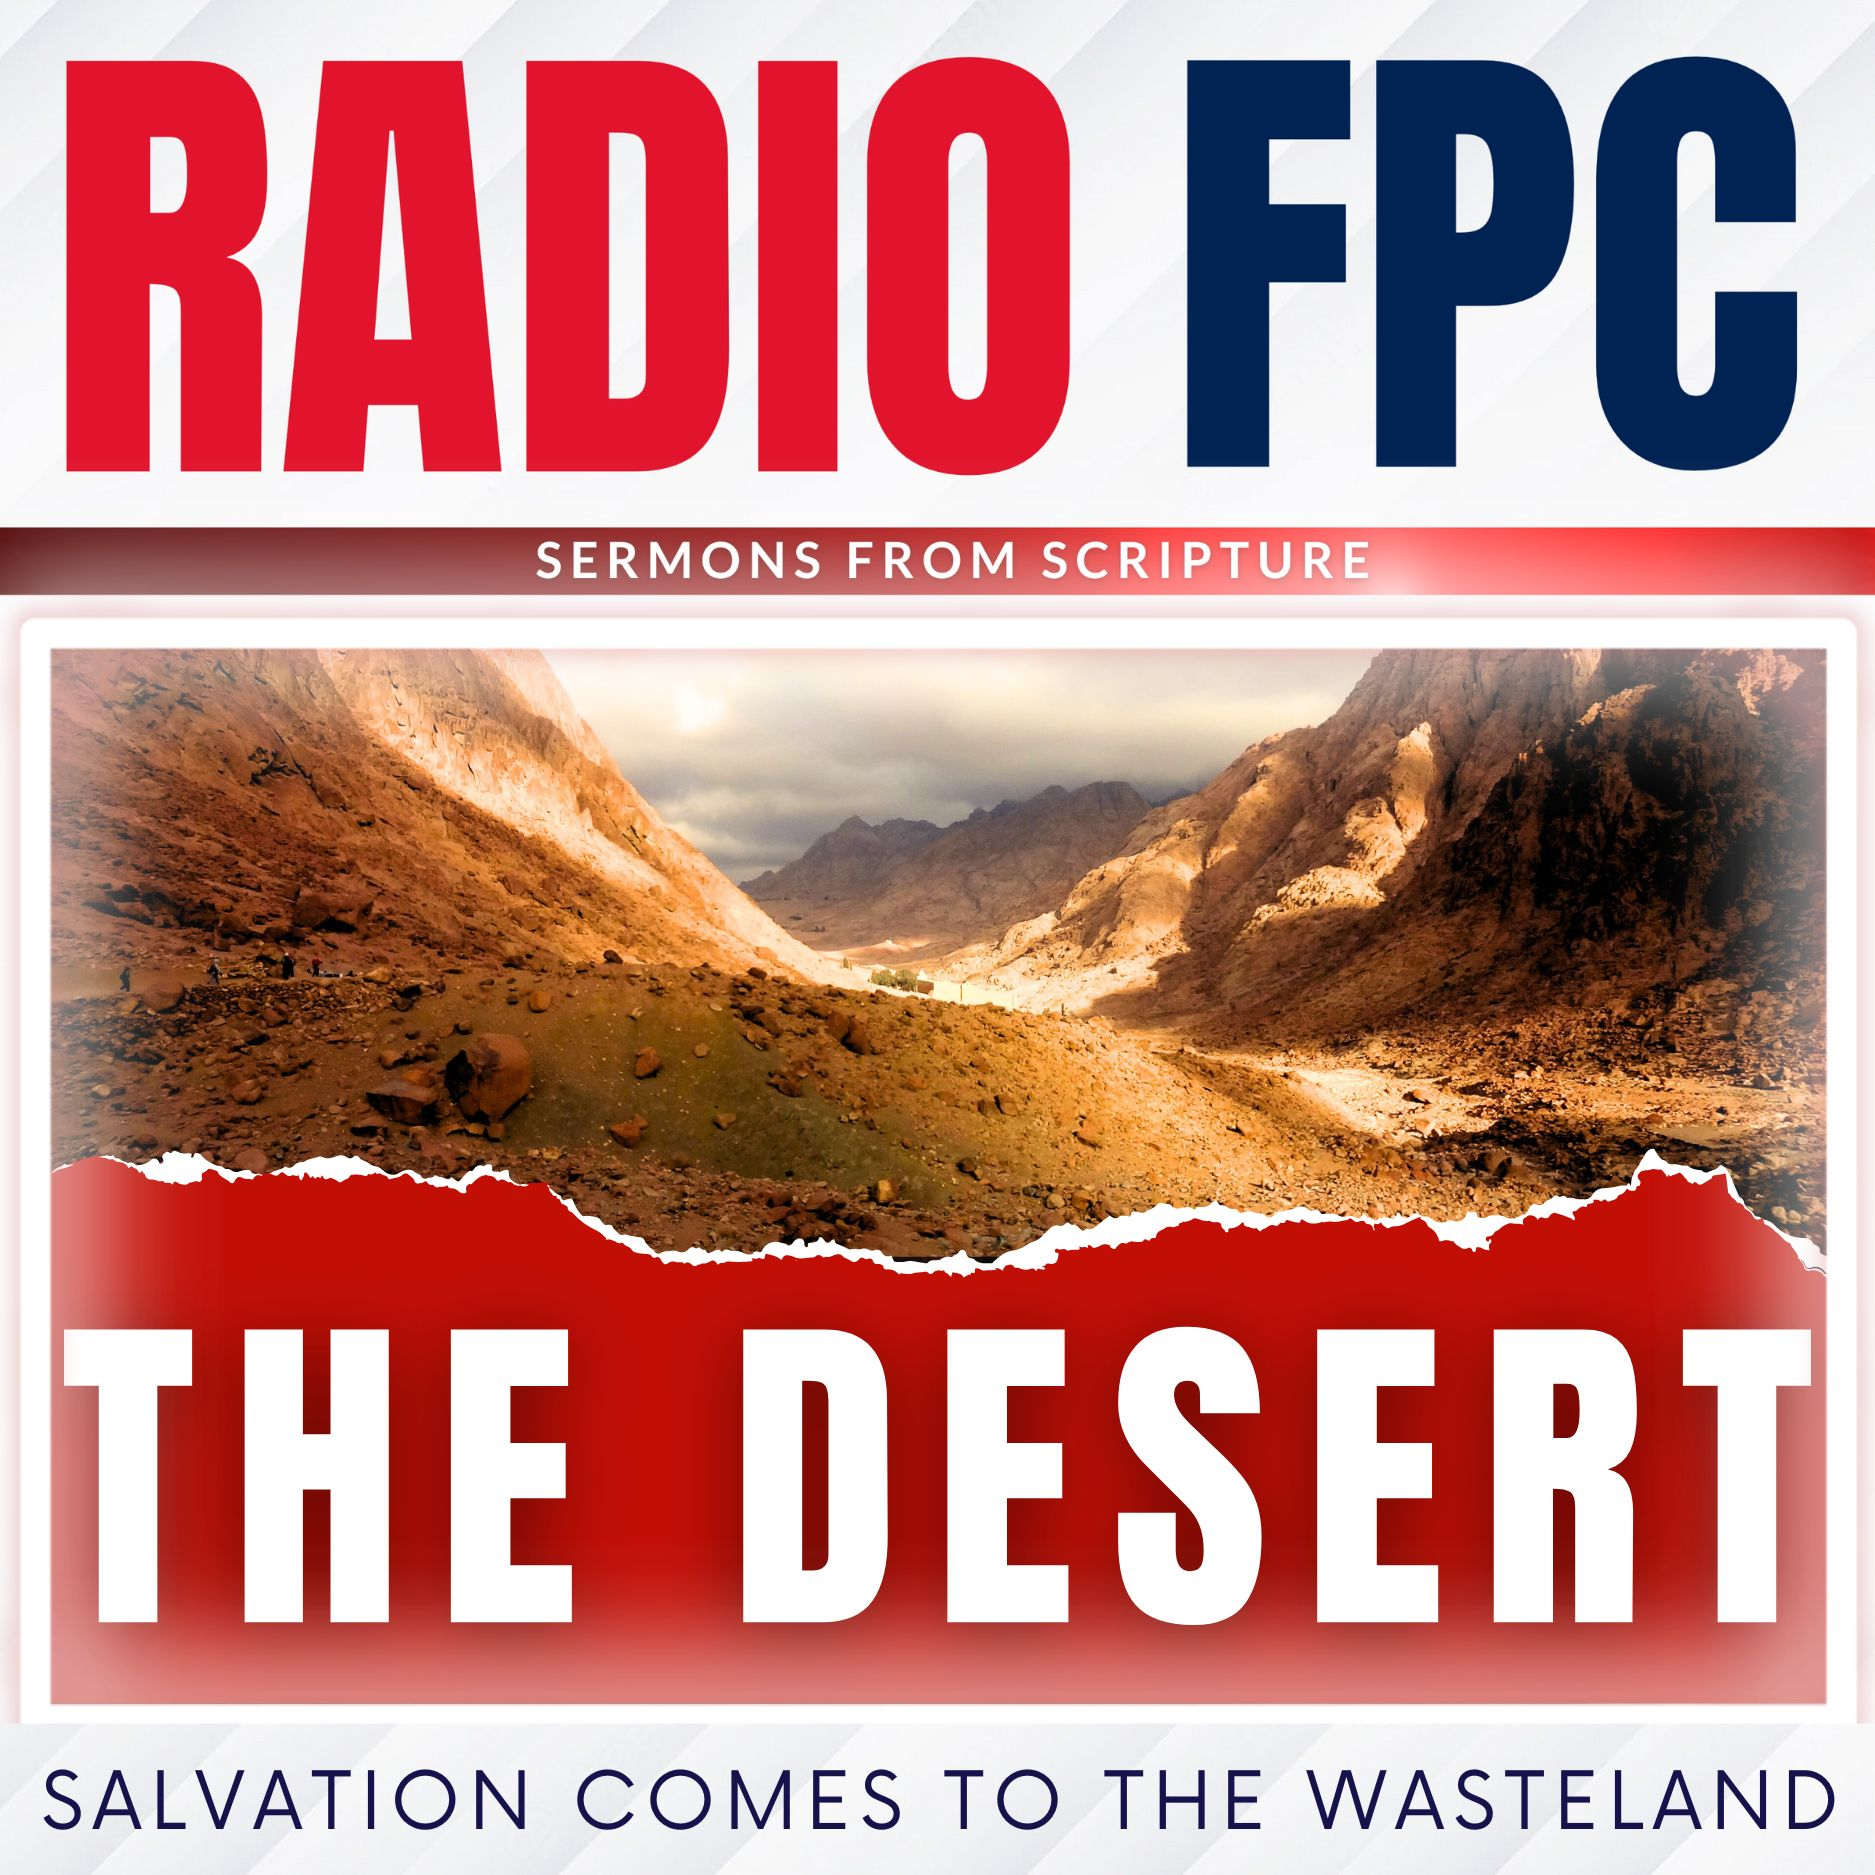 The Desert: Salvation Comes To The Wasteland